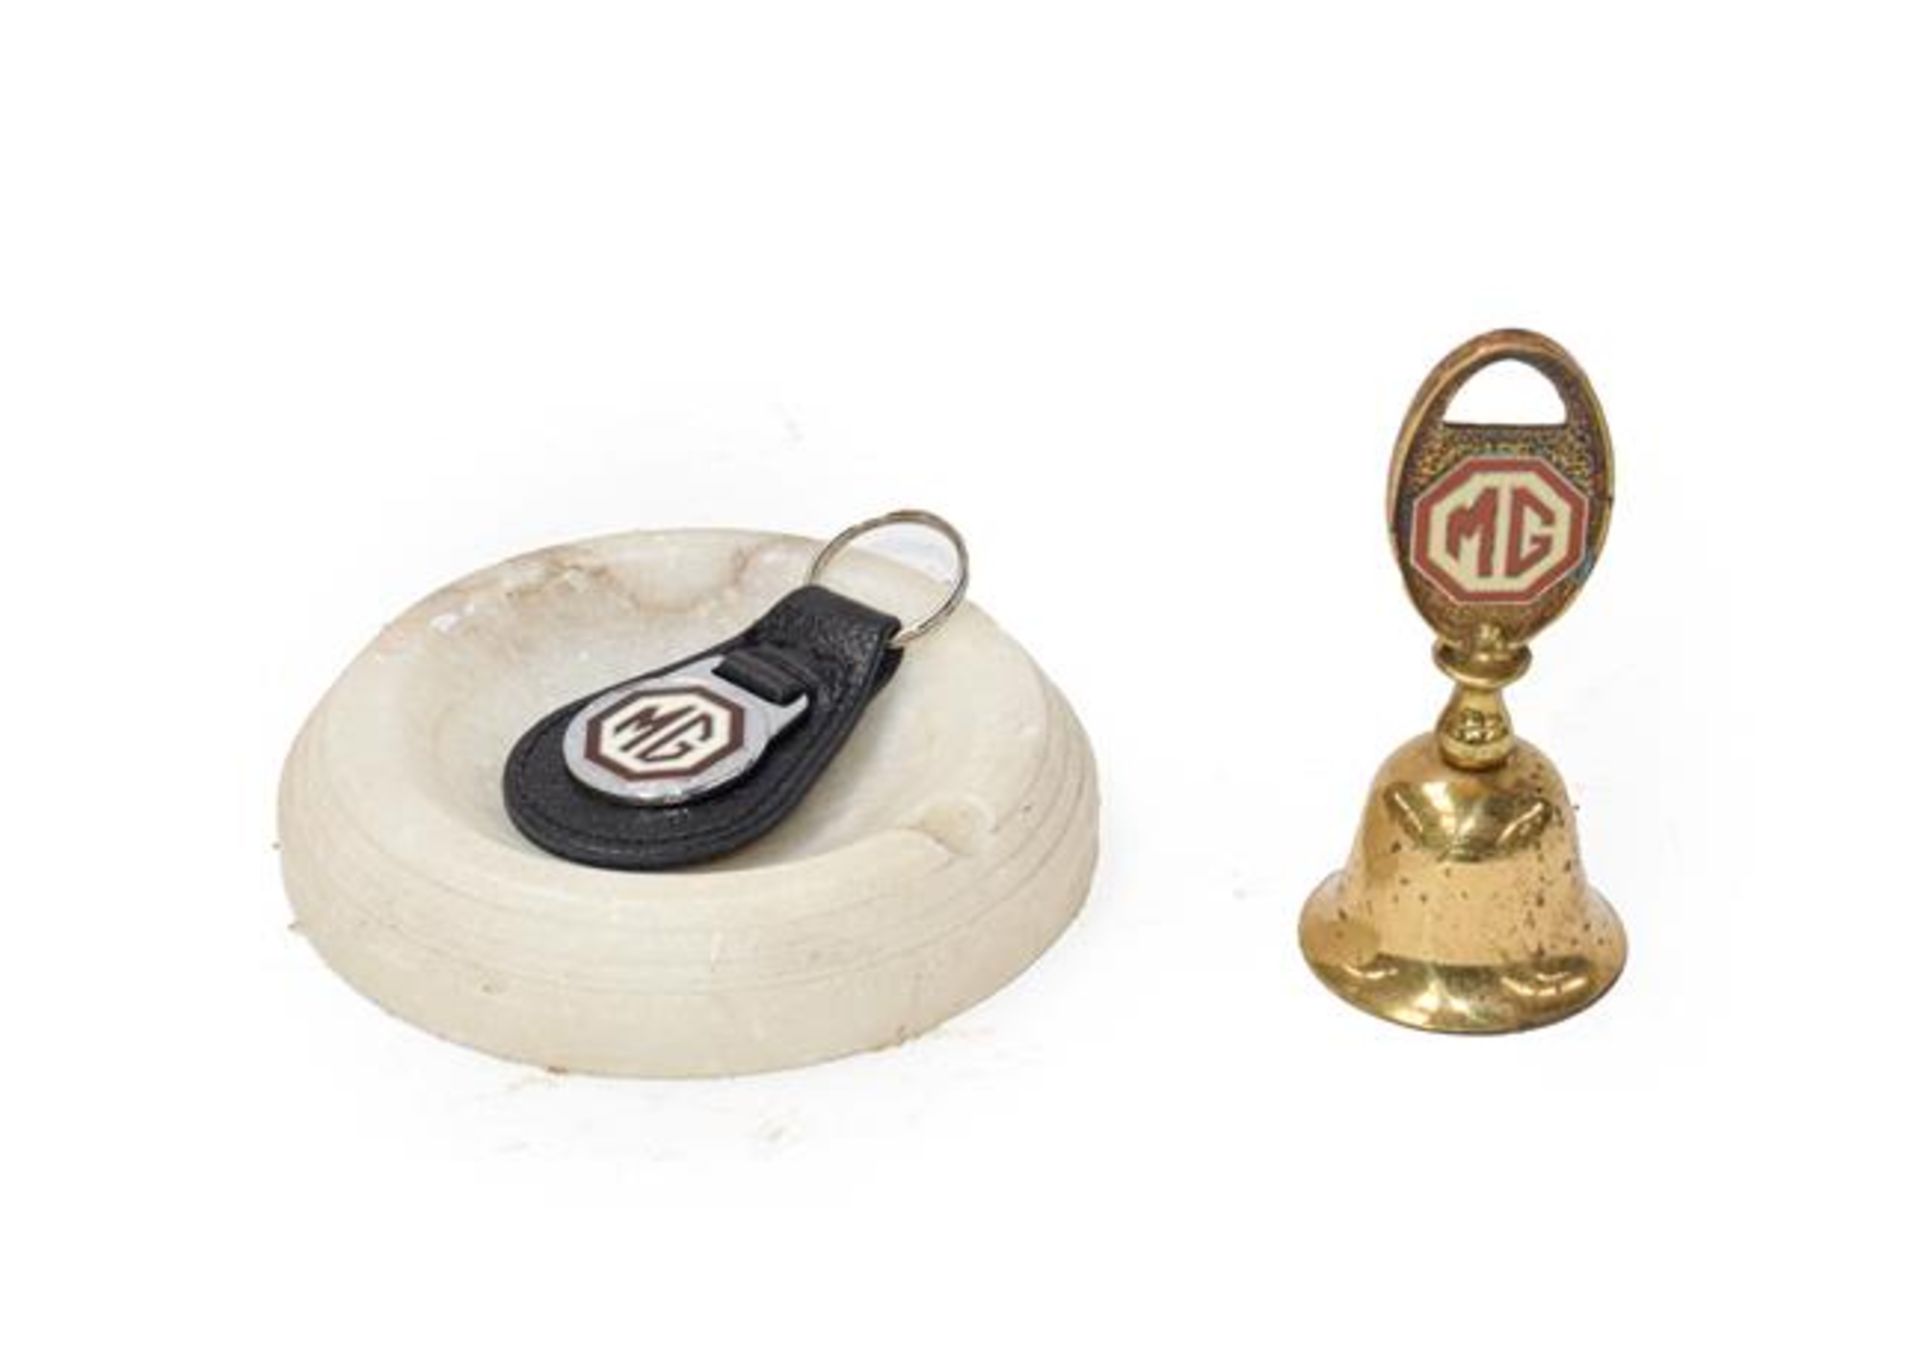 An MG Circular Marble Showroom Ashtray; A Brass Novelty Tea Bell, with MG emblem; and An MG